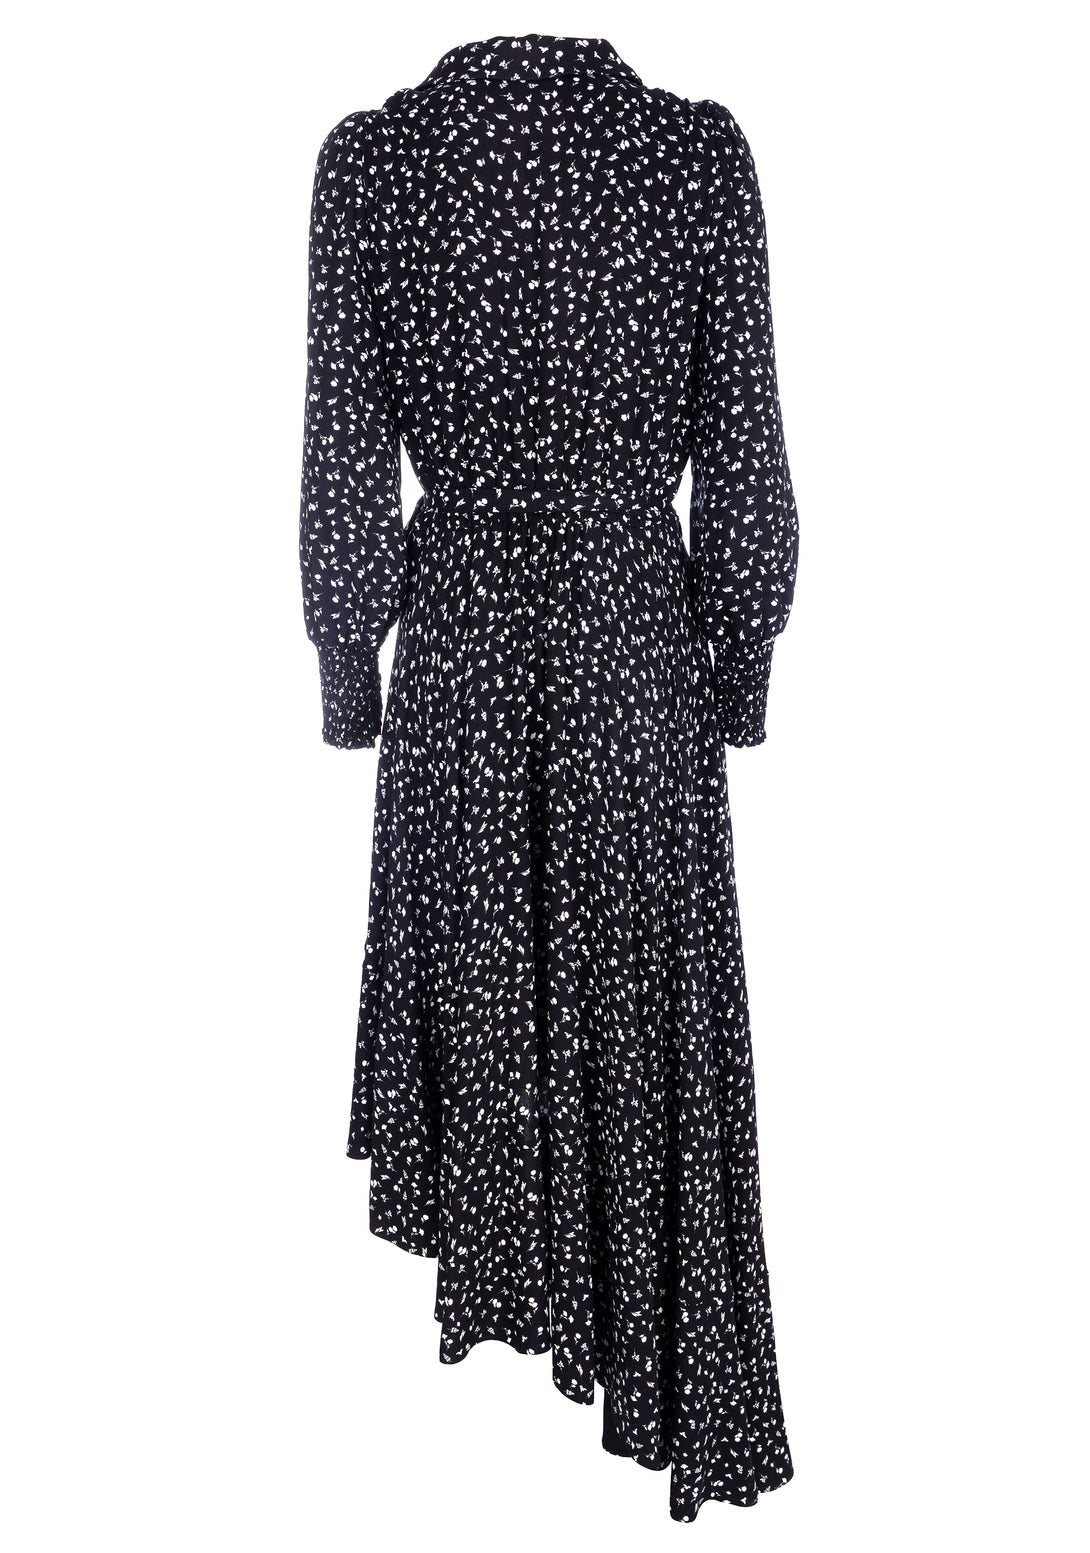 Wrap dress regular fit with flowery pattern